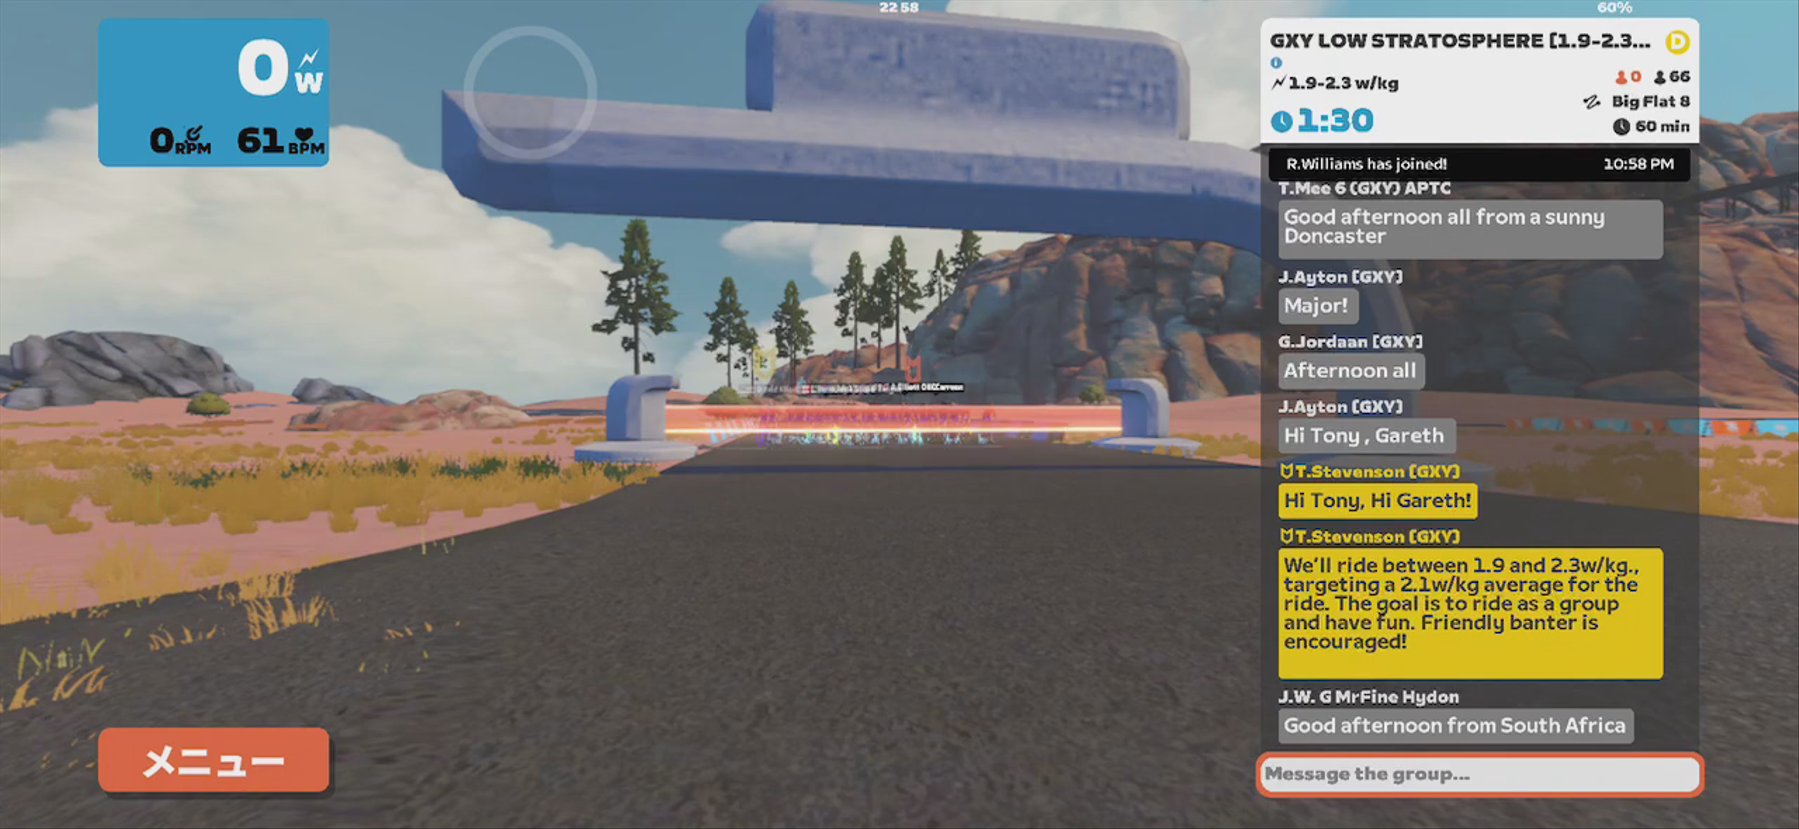 Zwift - Group Ride: GXY LOW STRATOSPHERE [1.9-2.3wkg] – CAT D (D) on Big Flat 8 in Watopia